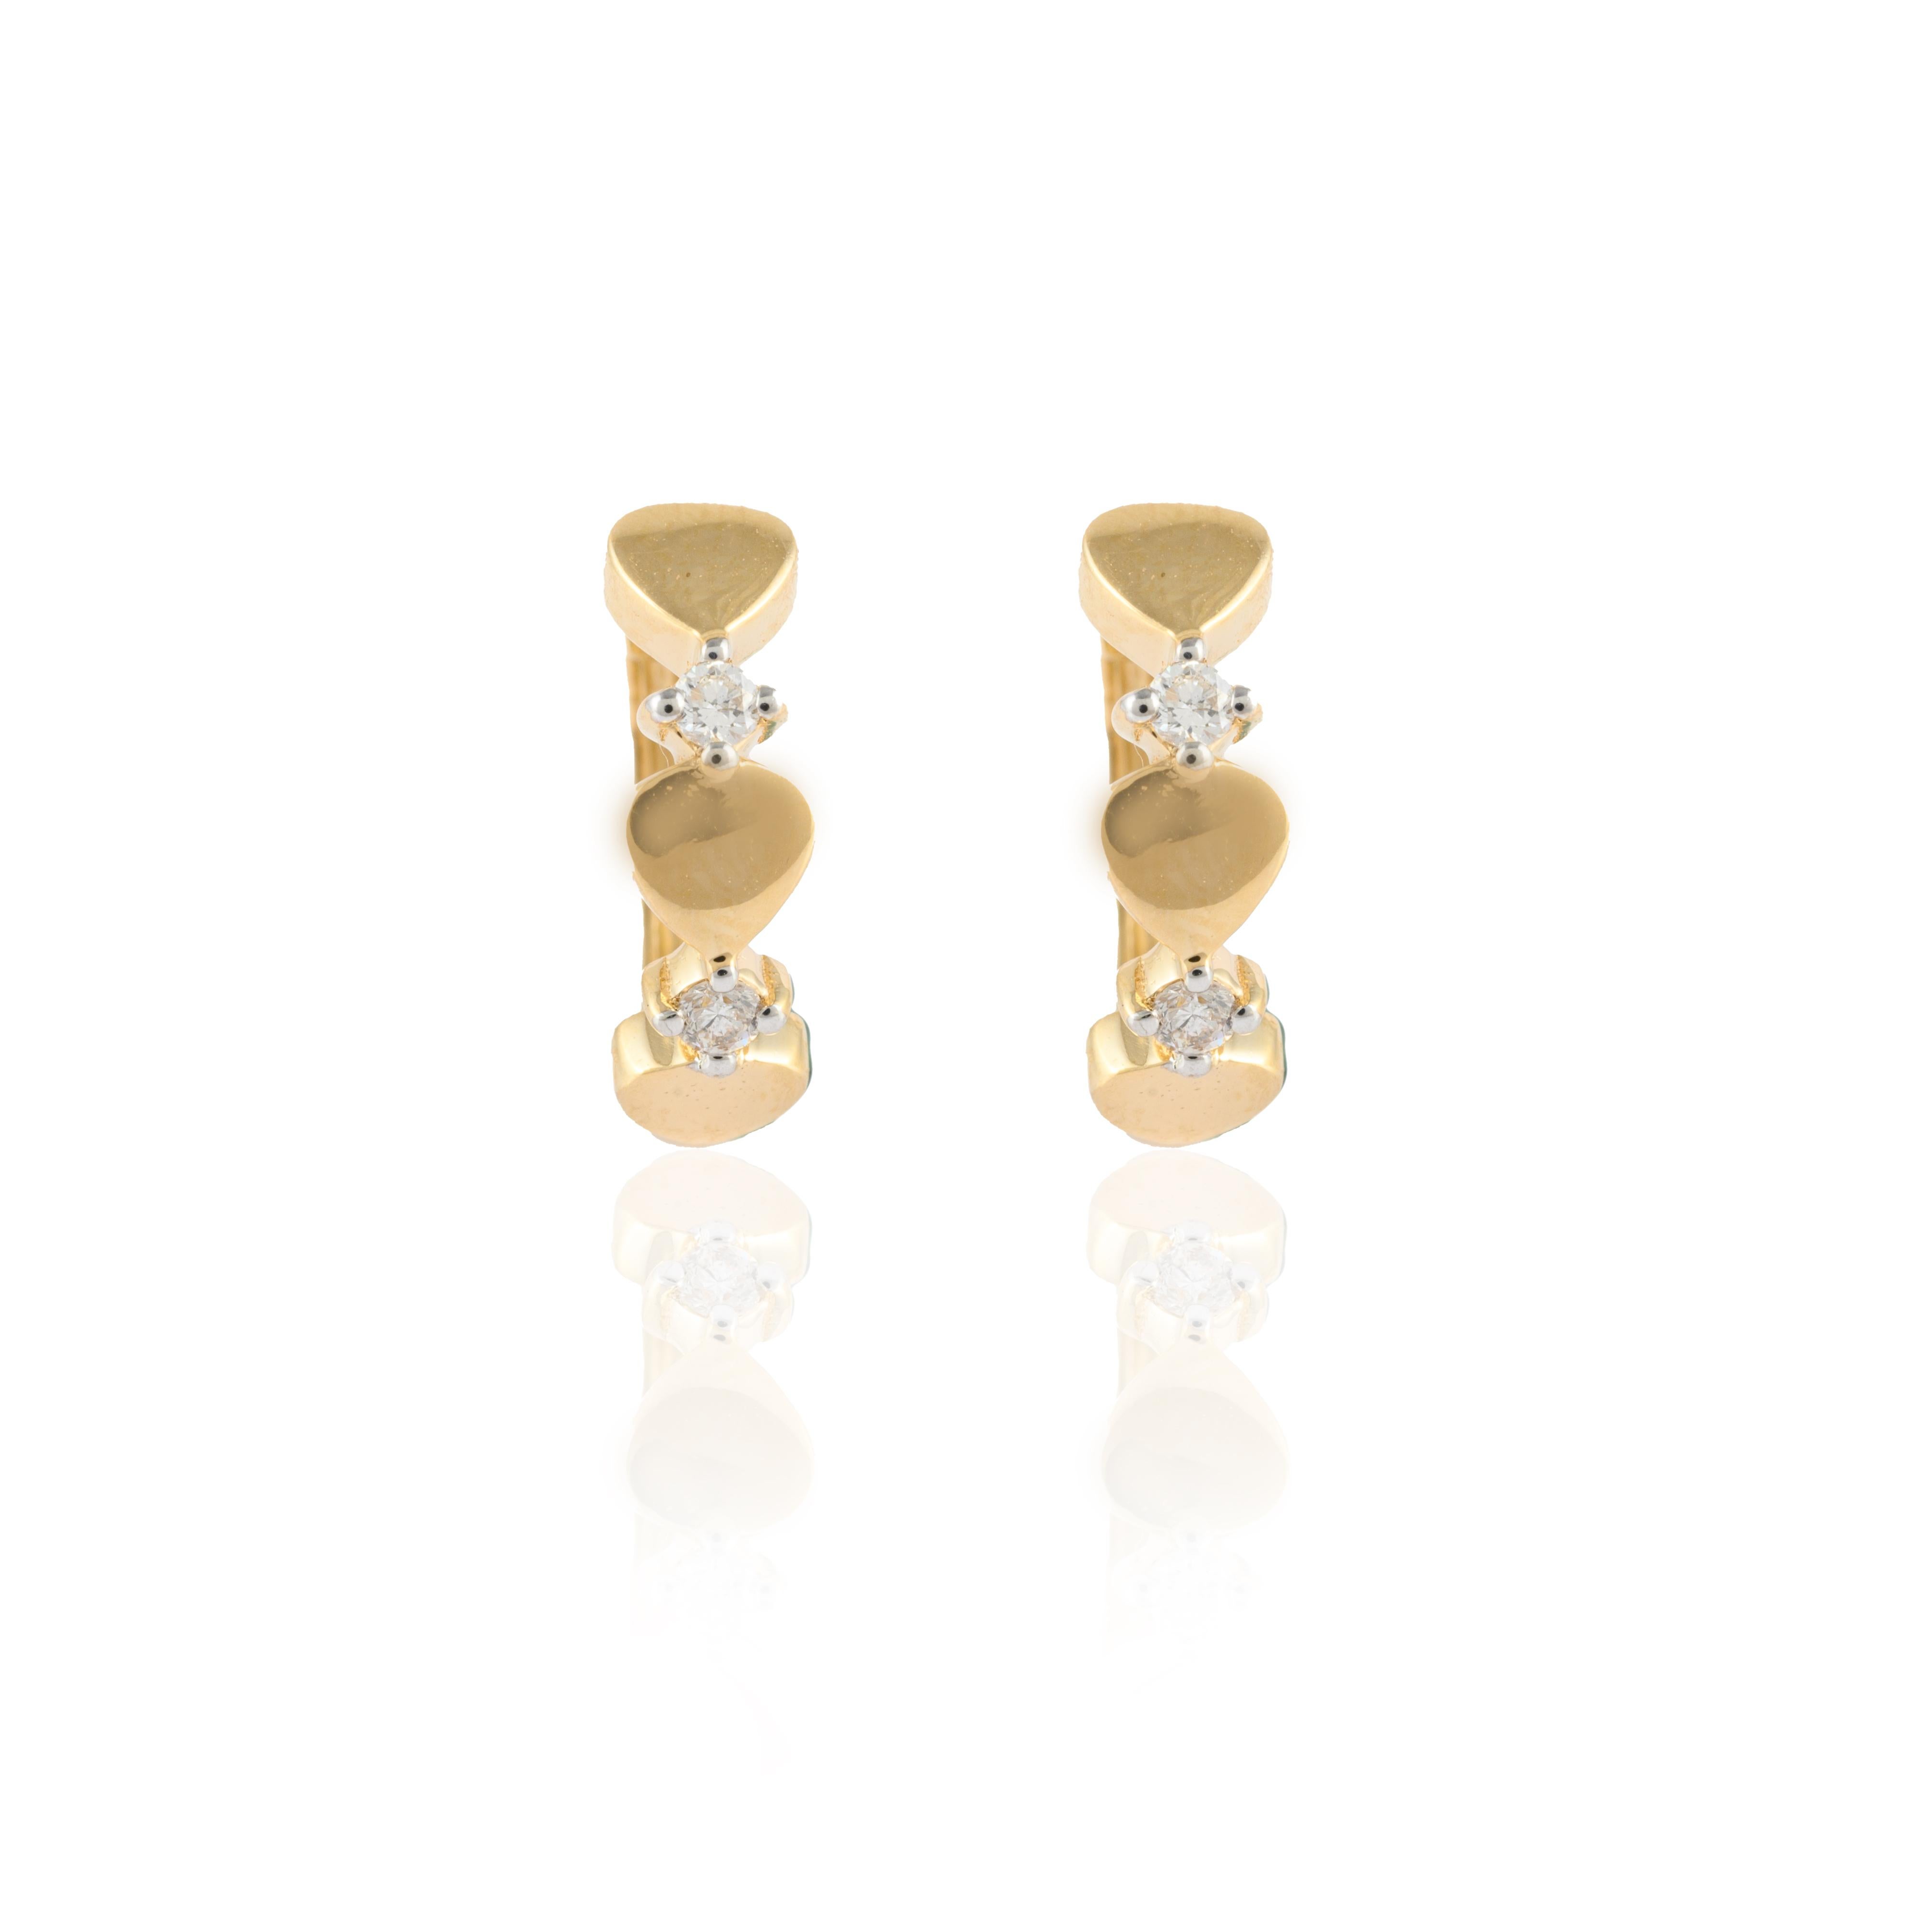 Dainty Love Heart Diamond Huggie Earrings in 14K Gold to make a statement with your look. You shall need huggie earrings to make a statement with your look. These earrings create a sparkling, luxurious look featuring round cut diamonds.
April